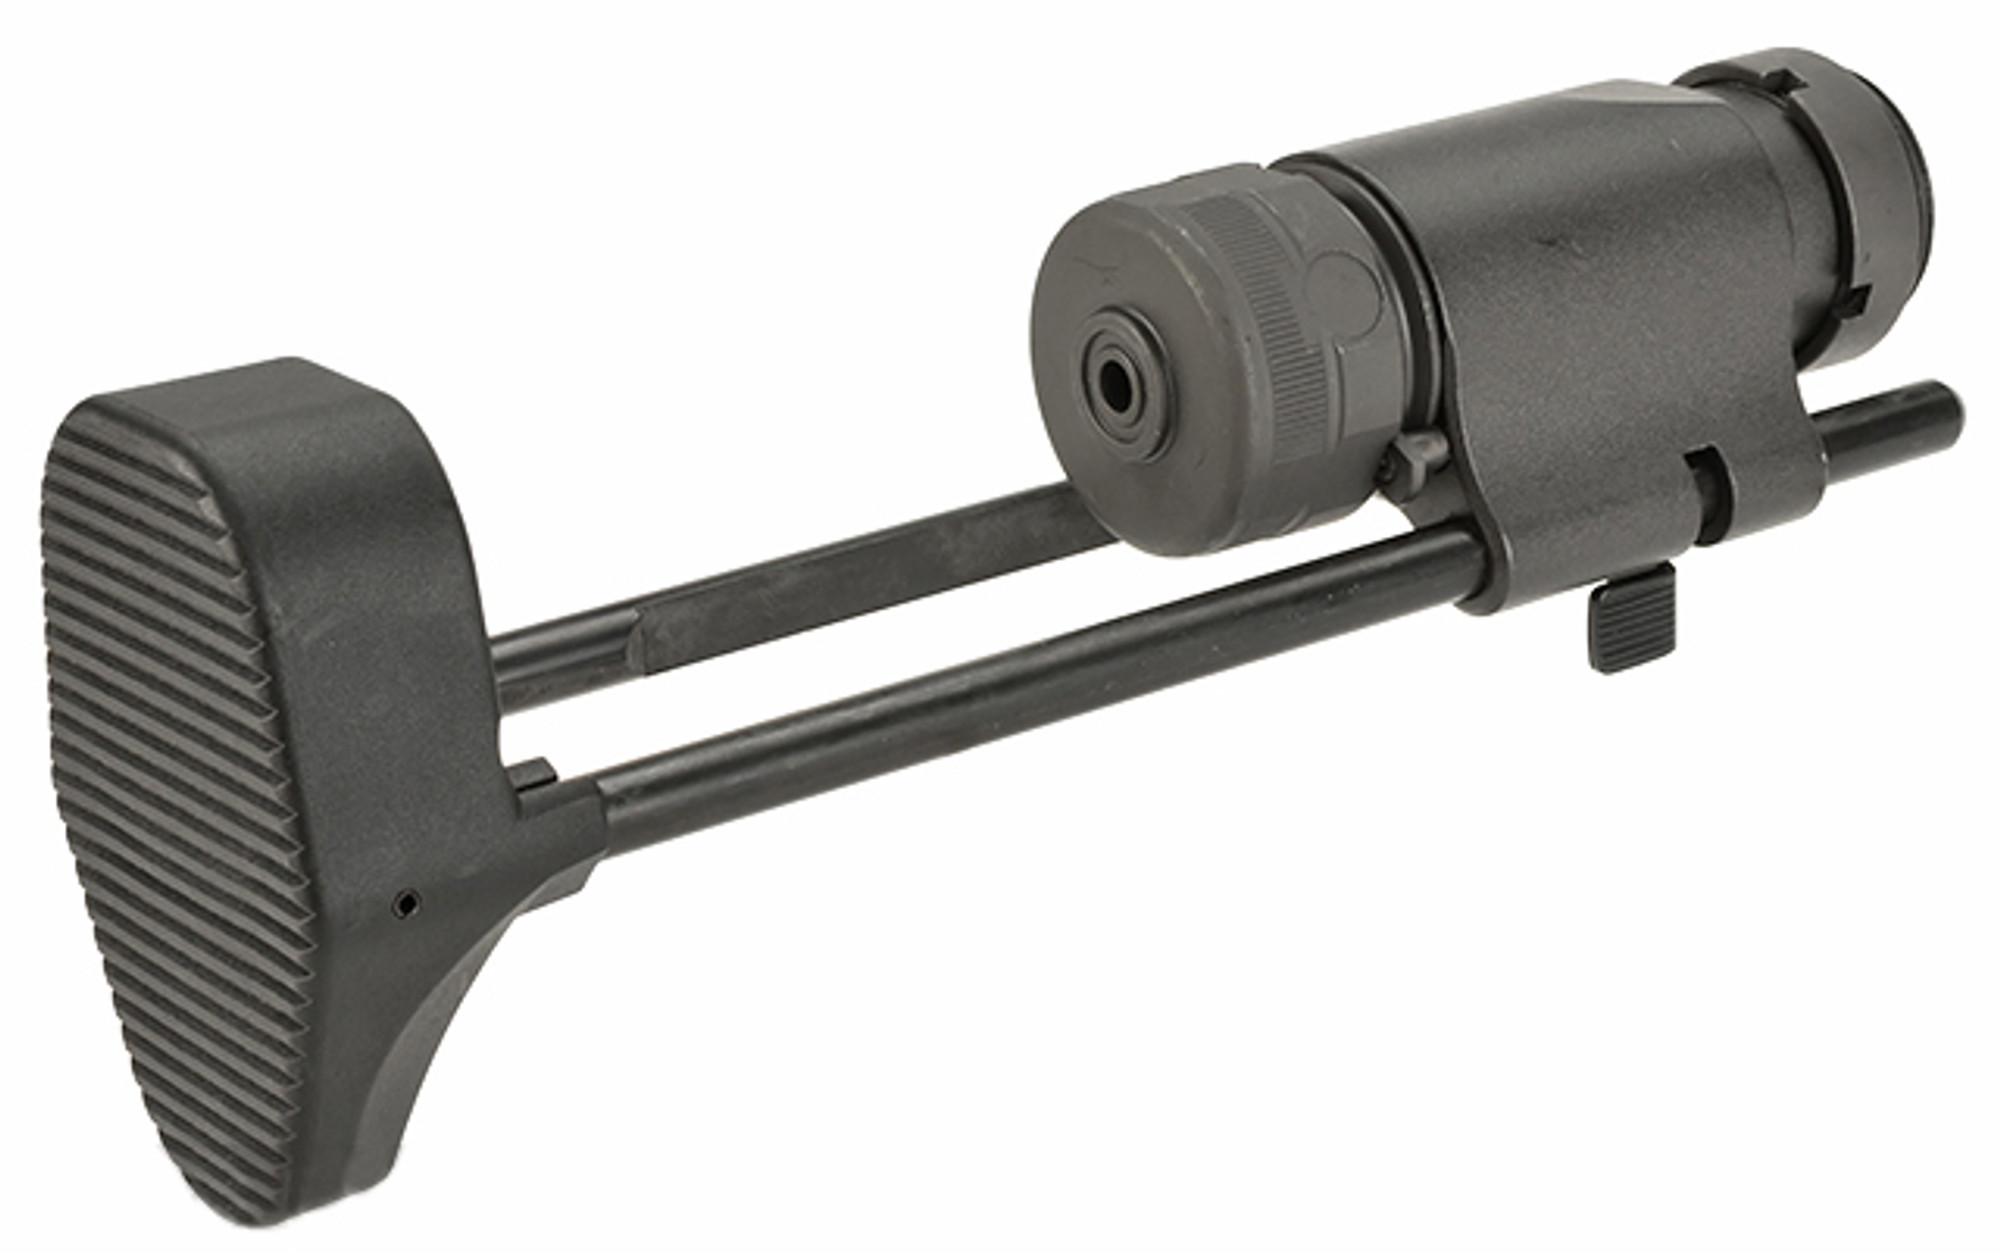 WE-Tech Retractable Stock and Buffer Tube Set for R5C Series Airsoft AEG Rifle